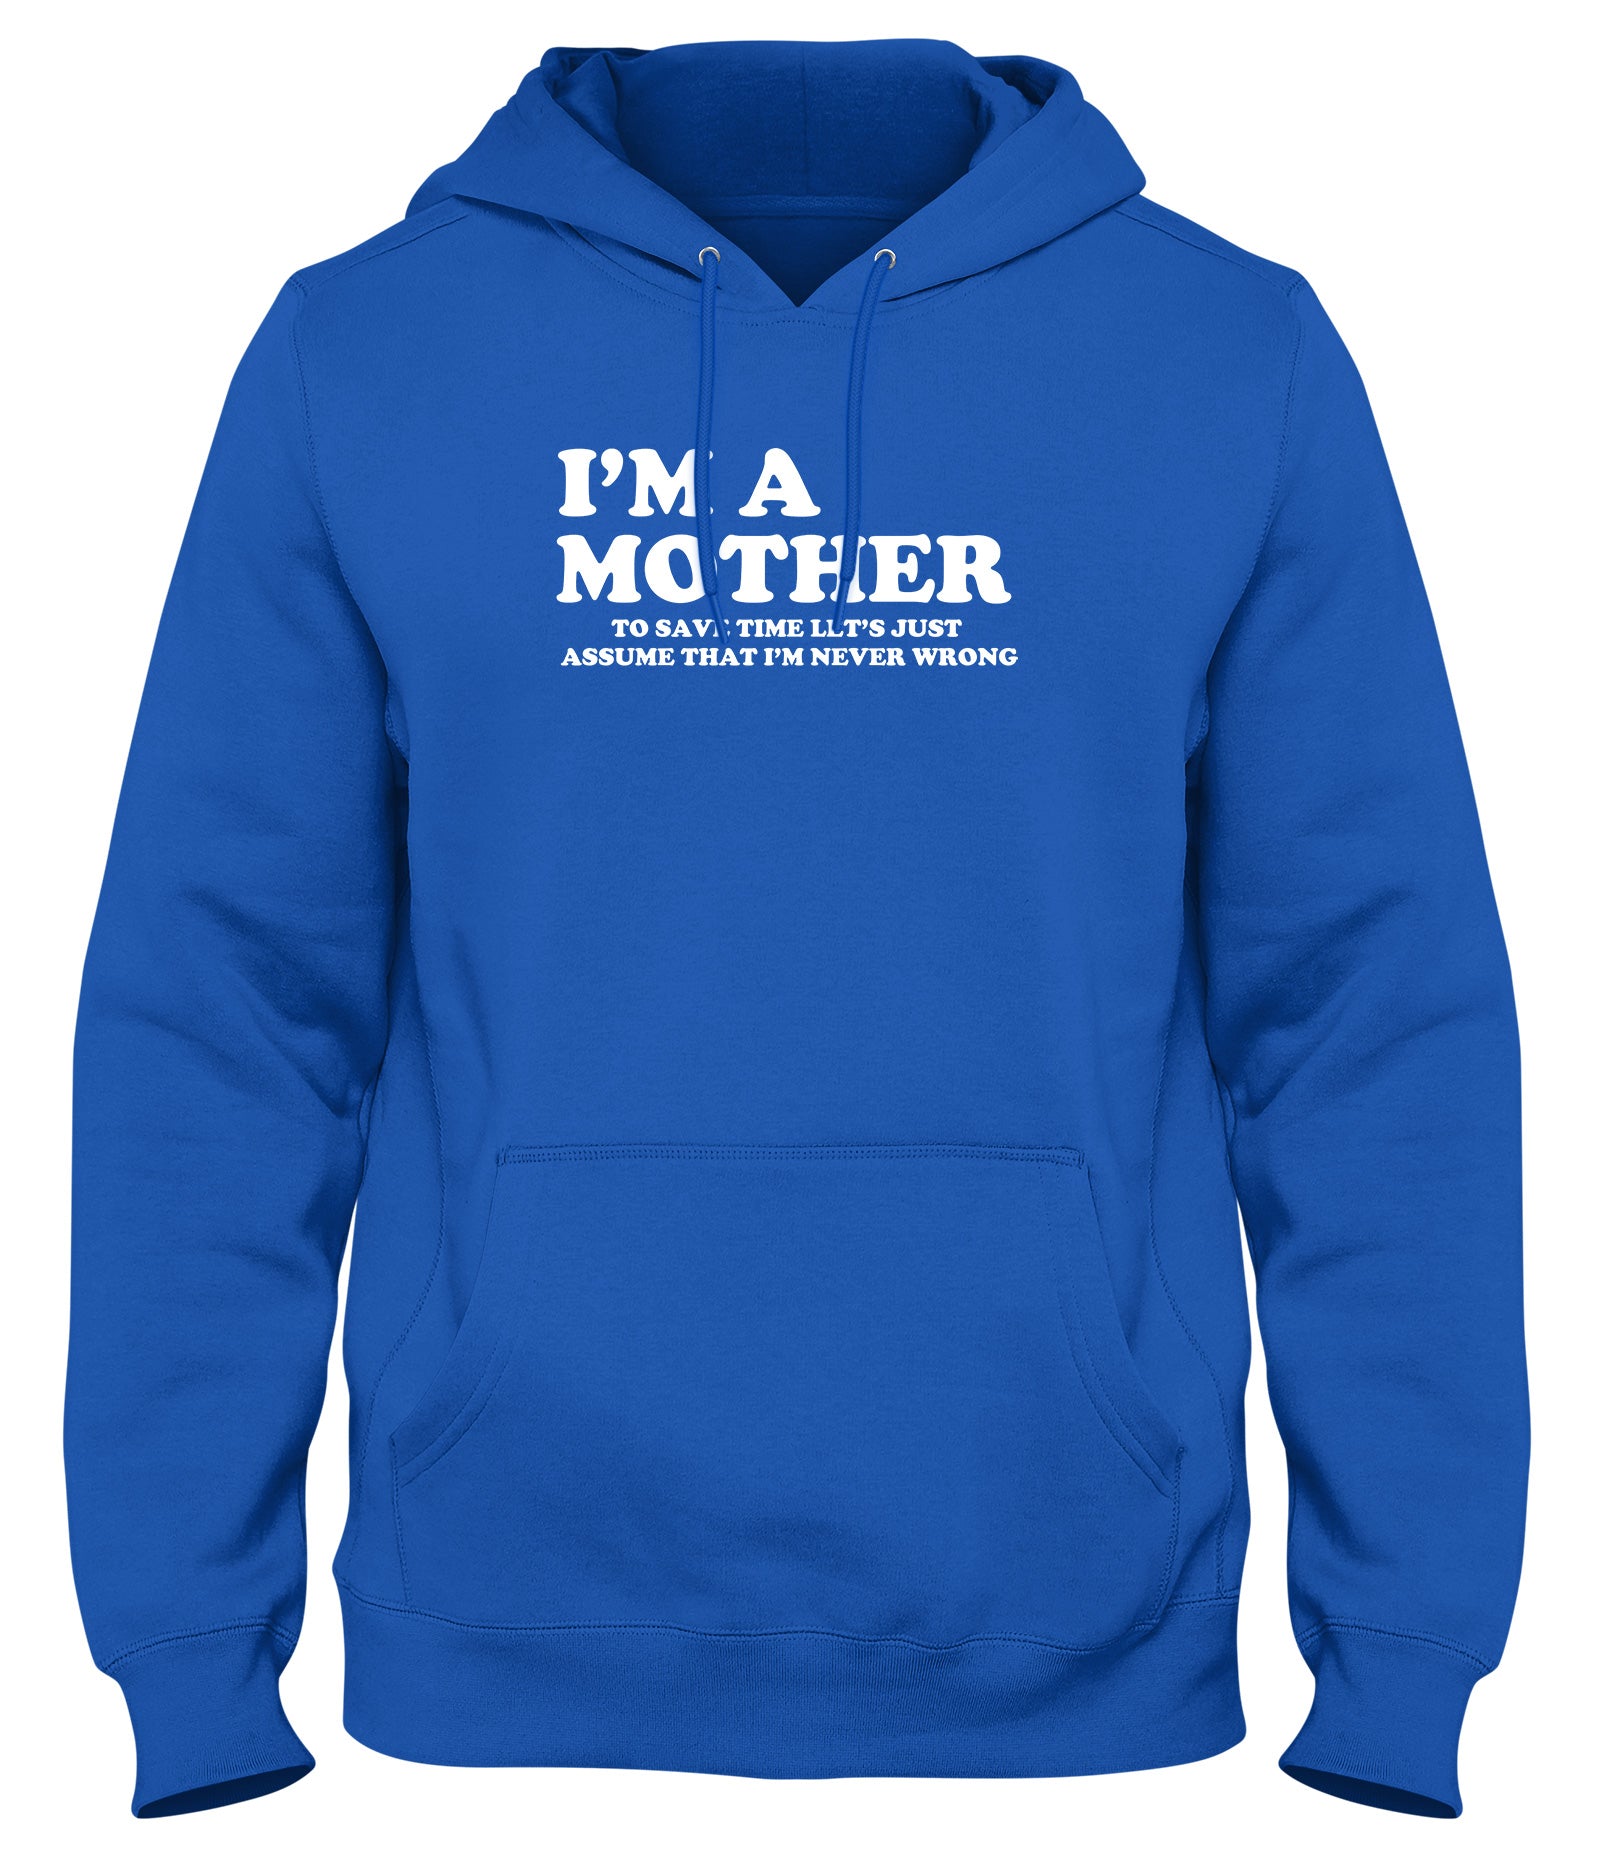 I'M A MOTHER TO SAVE TIME LET'S JUST ASSUME THAT I'M NEVER WRONG WOMENS LADIES MENS UNISEX HOODIE